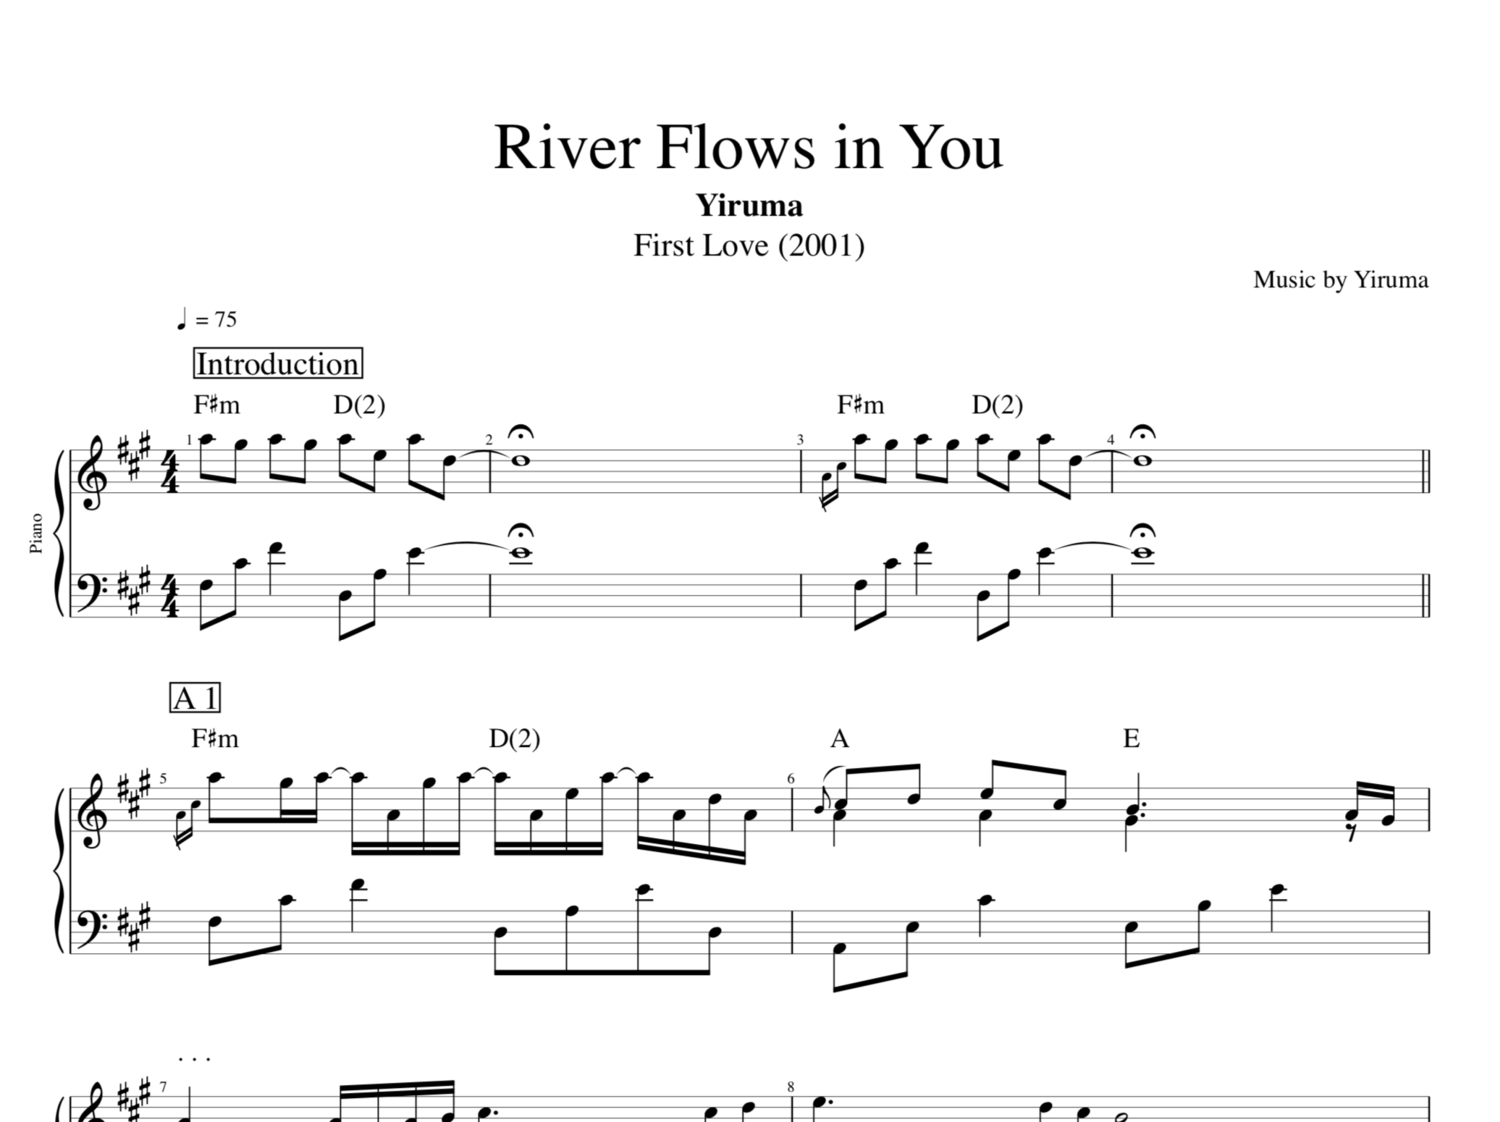 River Flows in You" || Piano Sheet Music Like The Greats .com